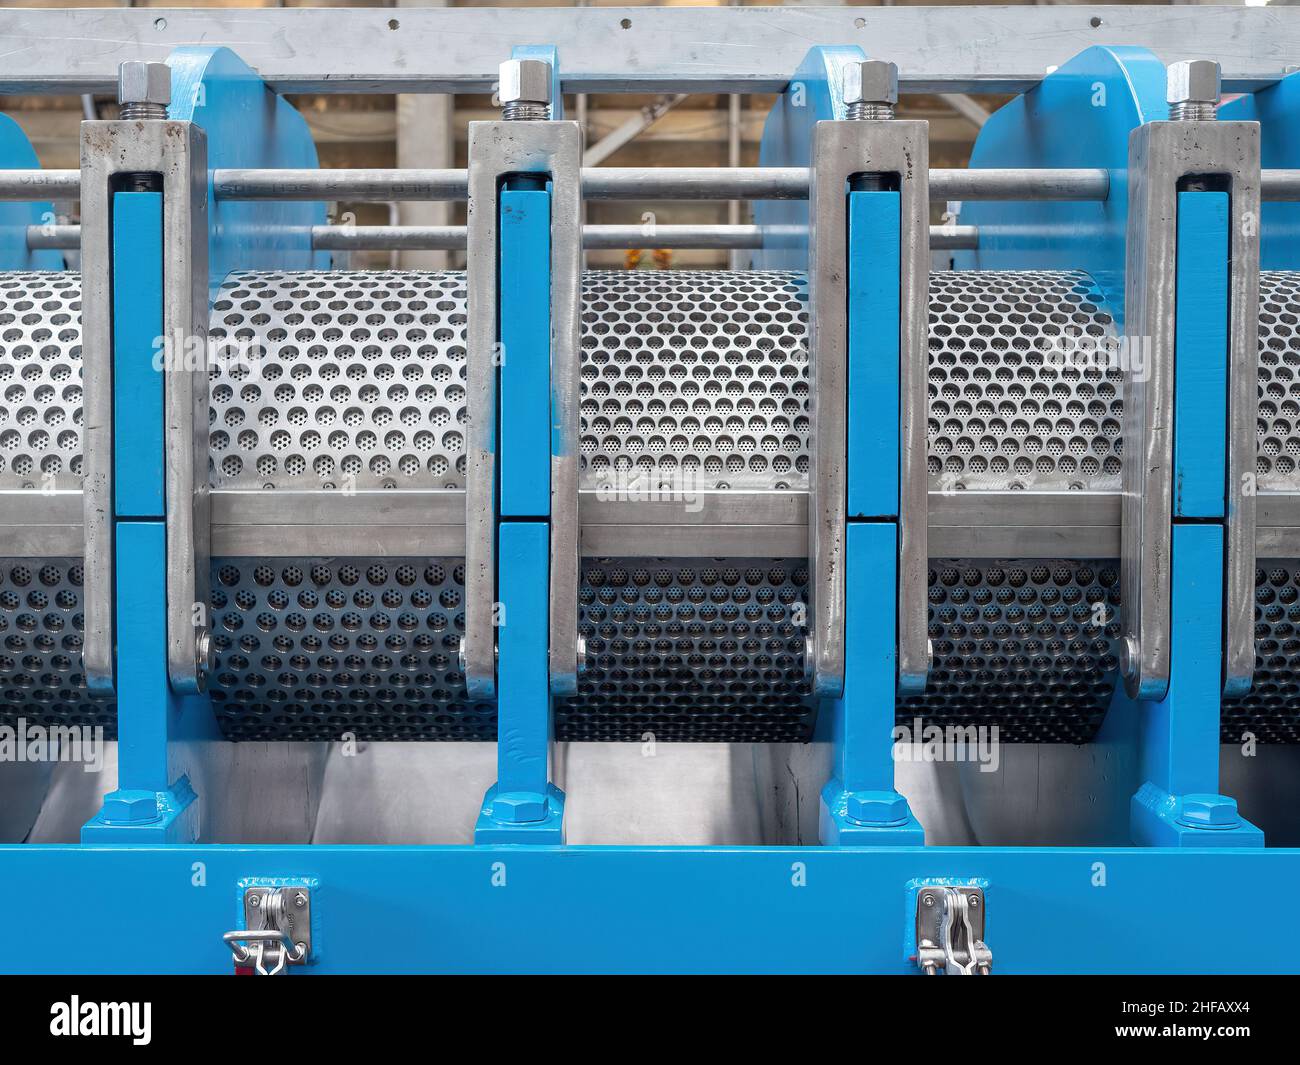 Detail of industrial twin screw press with screens, bridges and locks. Stock Photo